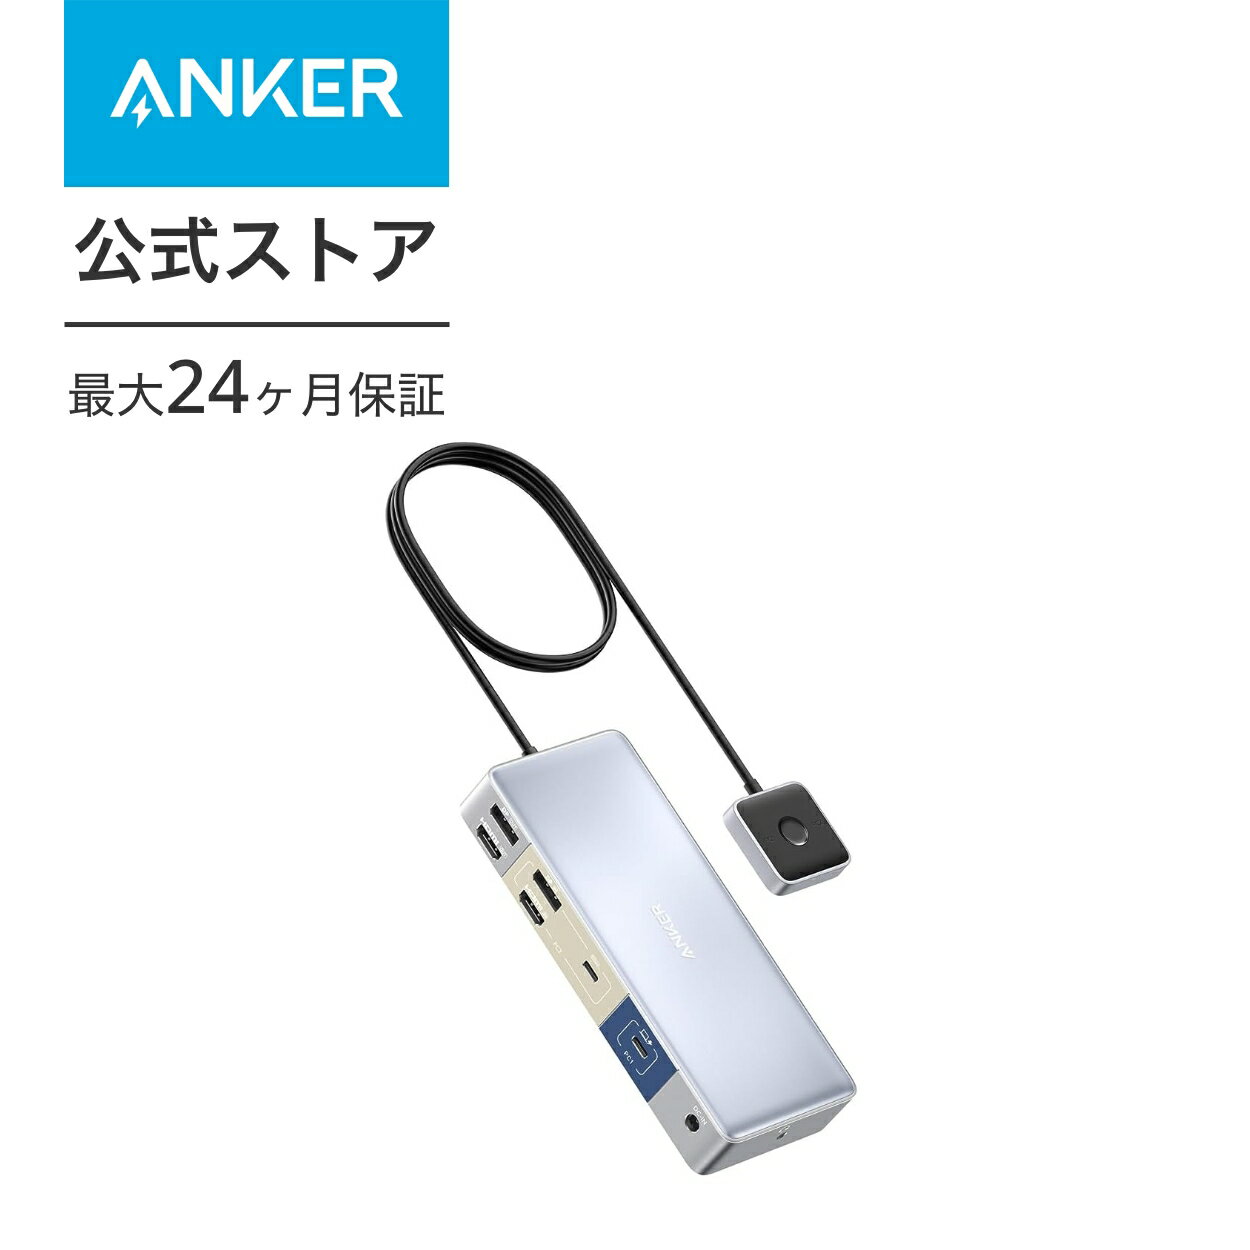 Anker KVM Switch (Dual 4K, For fXNgbvPC & m[gPC) 11-in-1 ؑ֊ fAfBXvC USB PD